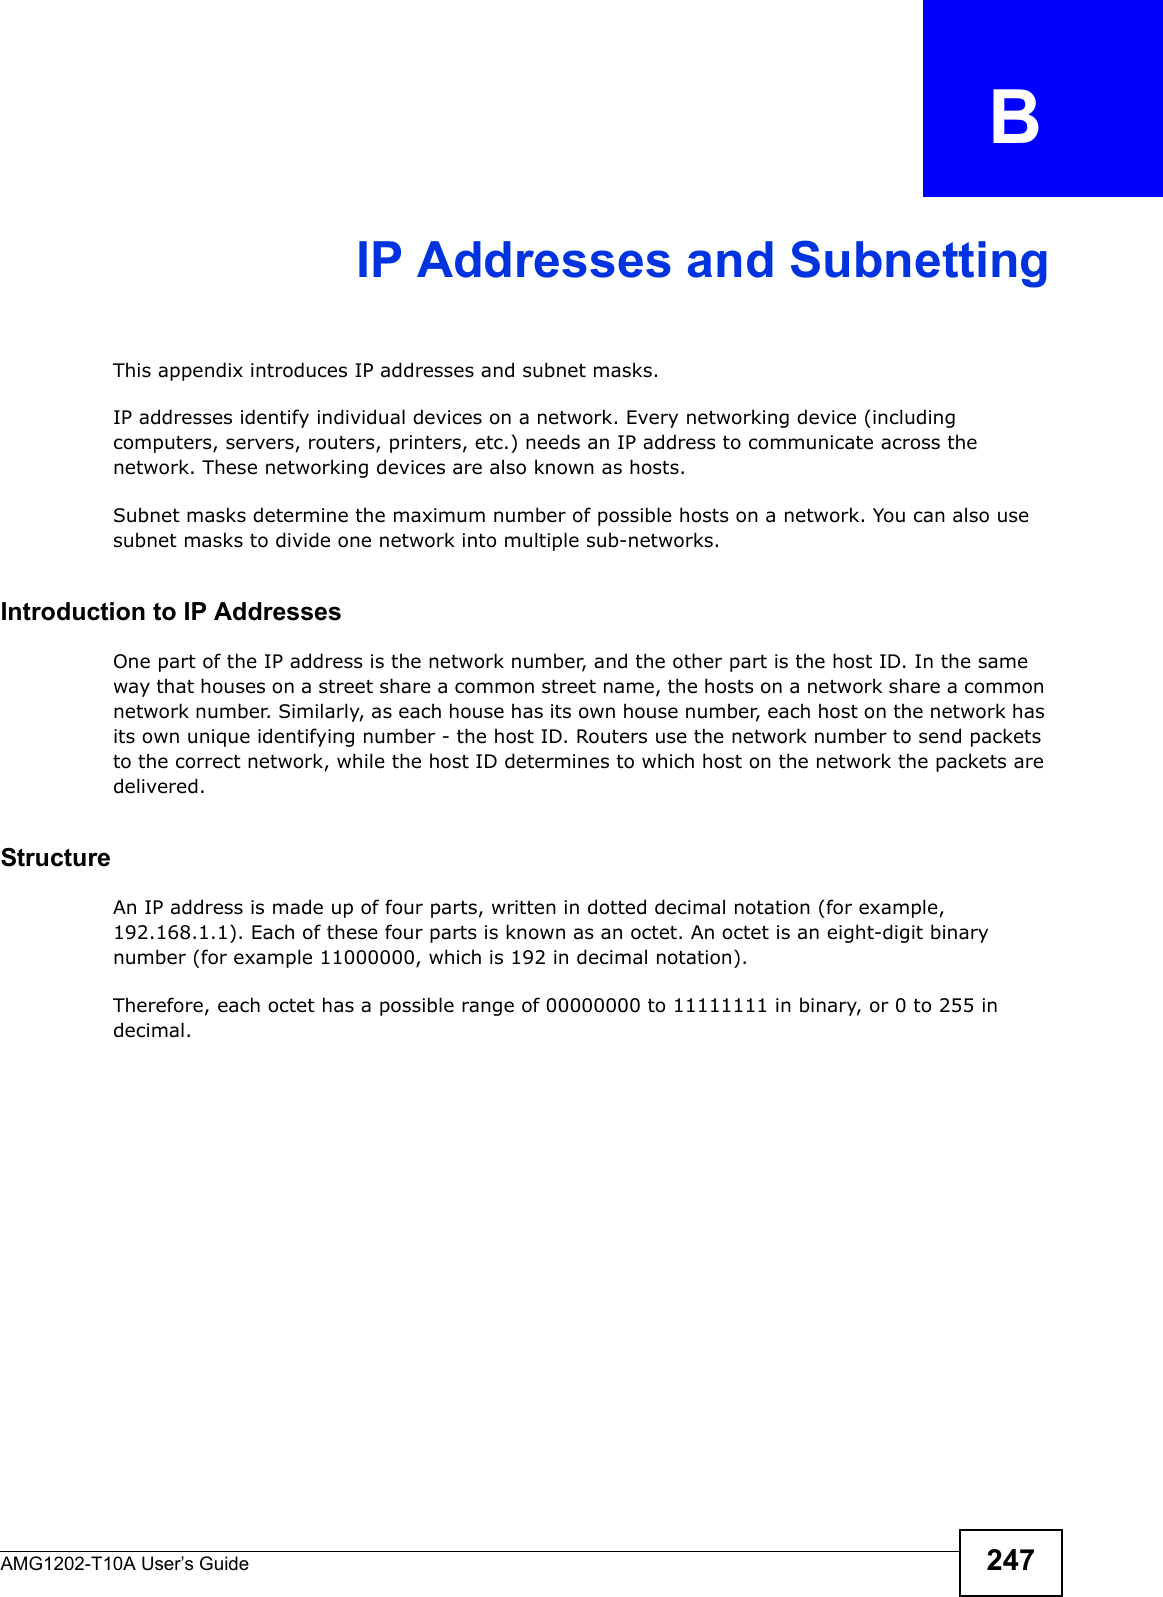 AMG1202-T10A User’s Guide 247APPENDIX   BIP Addresses and SubnettingThis appendix introduces IP addresses and subnet masks. IP addresses identify individual devices on a network. Every networking device (including computers, servers, routers, printers, etc.) needs an IP address to communicate across the network. These networking devices are also known as hosts.Subnet masks determine the maximum number of possible hosts on a network. You can also use subnet masks to divide one network into multiple sub-networks.Introduction to IP AddressesOne part of the IP address is the network number, and the other part is the host ID. In the same way that houses on a street share a common street name, the hosts on a network share a common network number. Similarly, as each house has its own house number, each host on the network has its own unique identifying number - the host ID. Routers use the network number to send packets to the correct network, while the host ID determines to which host on the network the packets are delivered.StructureAn IP address is made up of four parts, written in dotted decimal notation (for example, 192.168.1.1). Each of these four parts is known as an octet. An octet is an eight-digit binary number (for example 11000000, which is 192 in decimal notation). Therefore, each octet has a possible range of 00000000 to 11111111 in binary, or 0 to 255 in decimal.